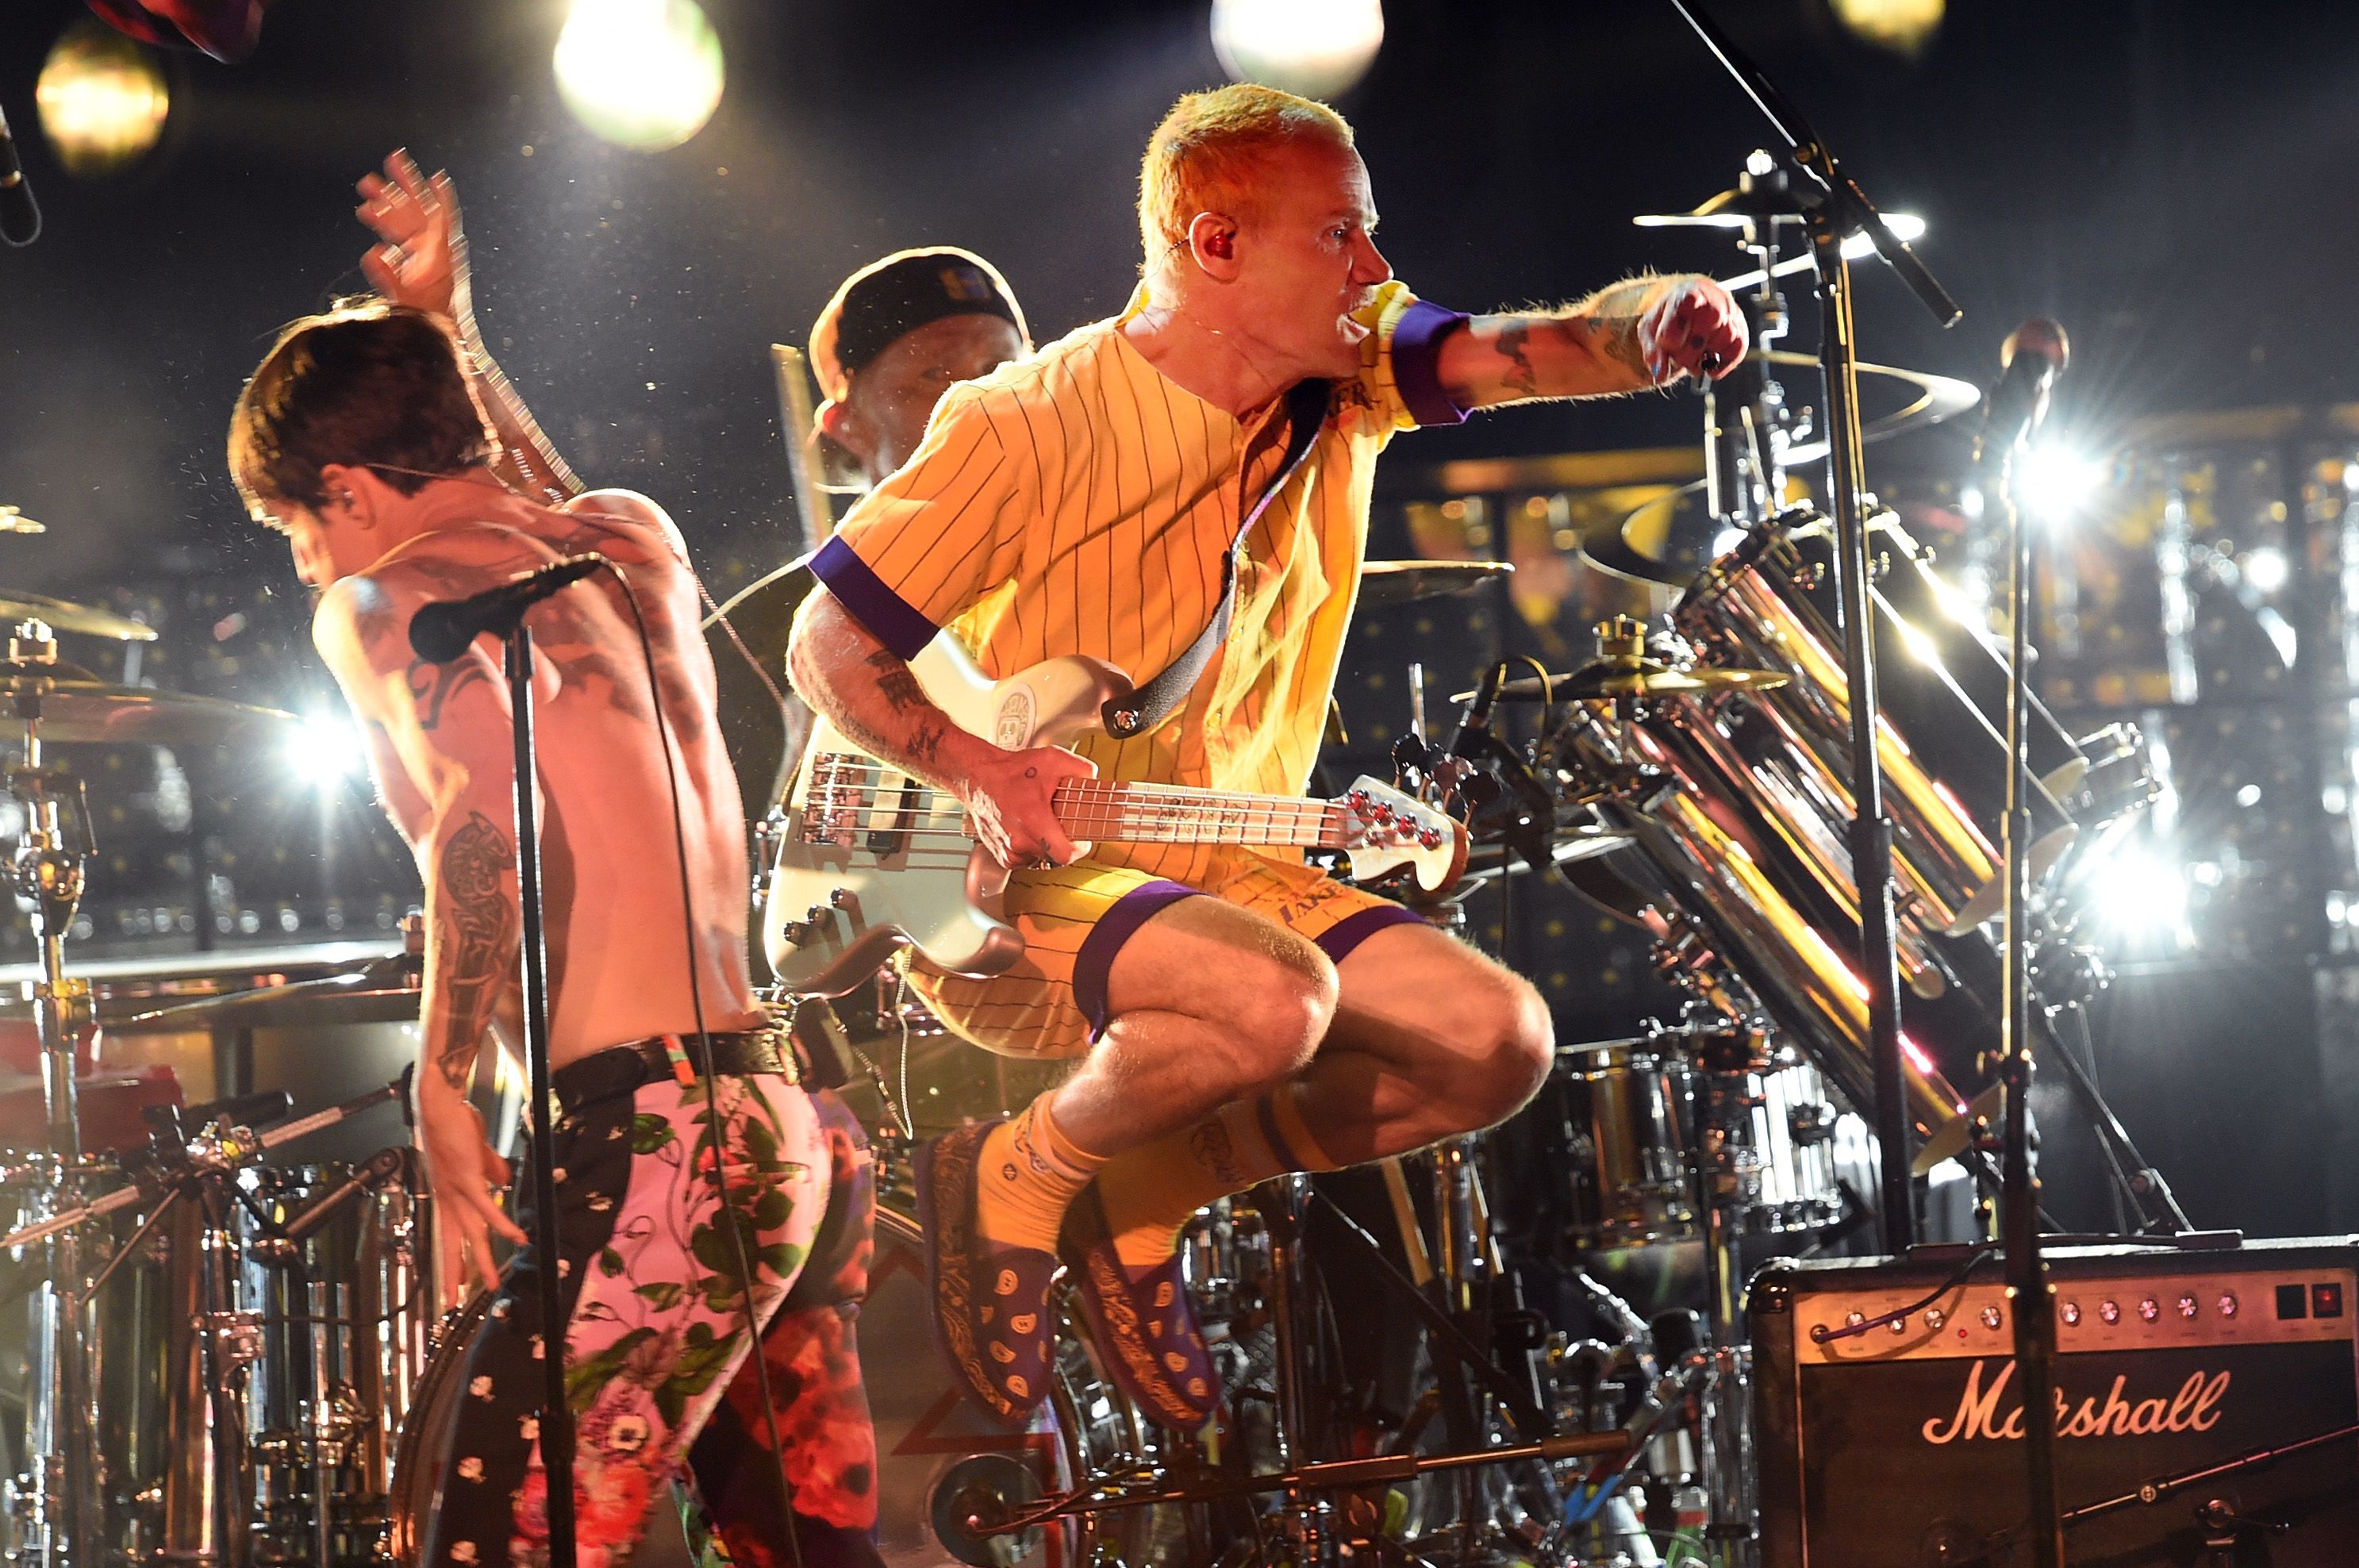 John Red Hot Chili Peppers, band says |